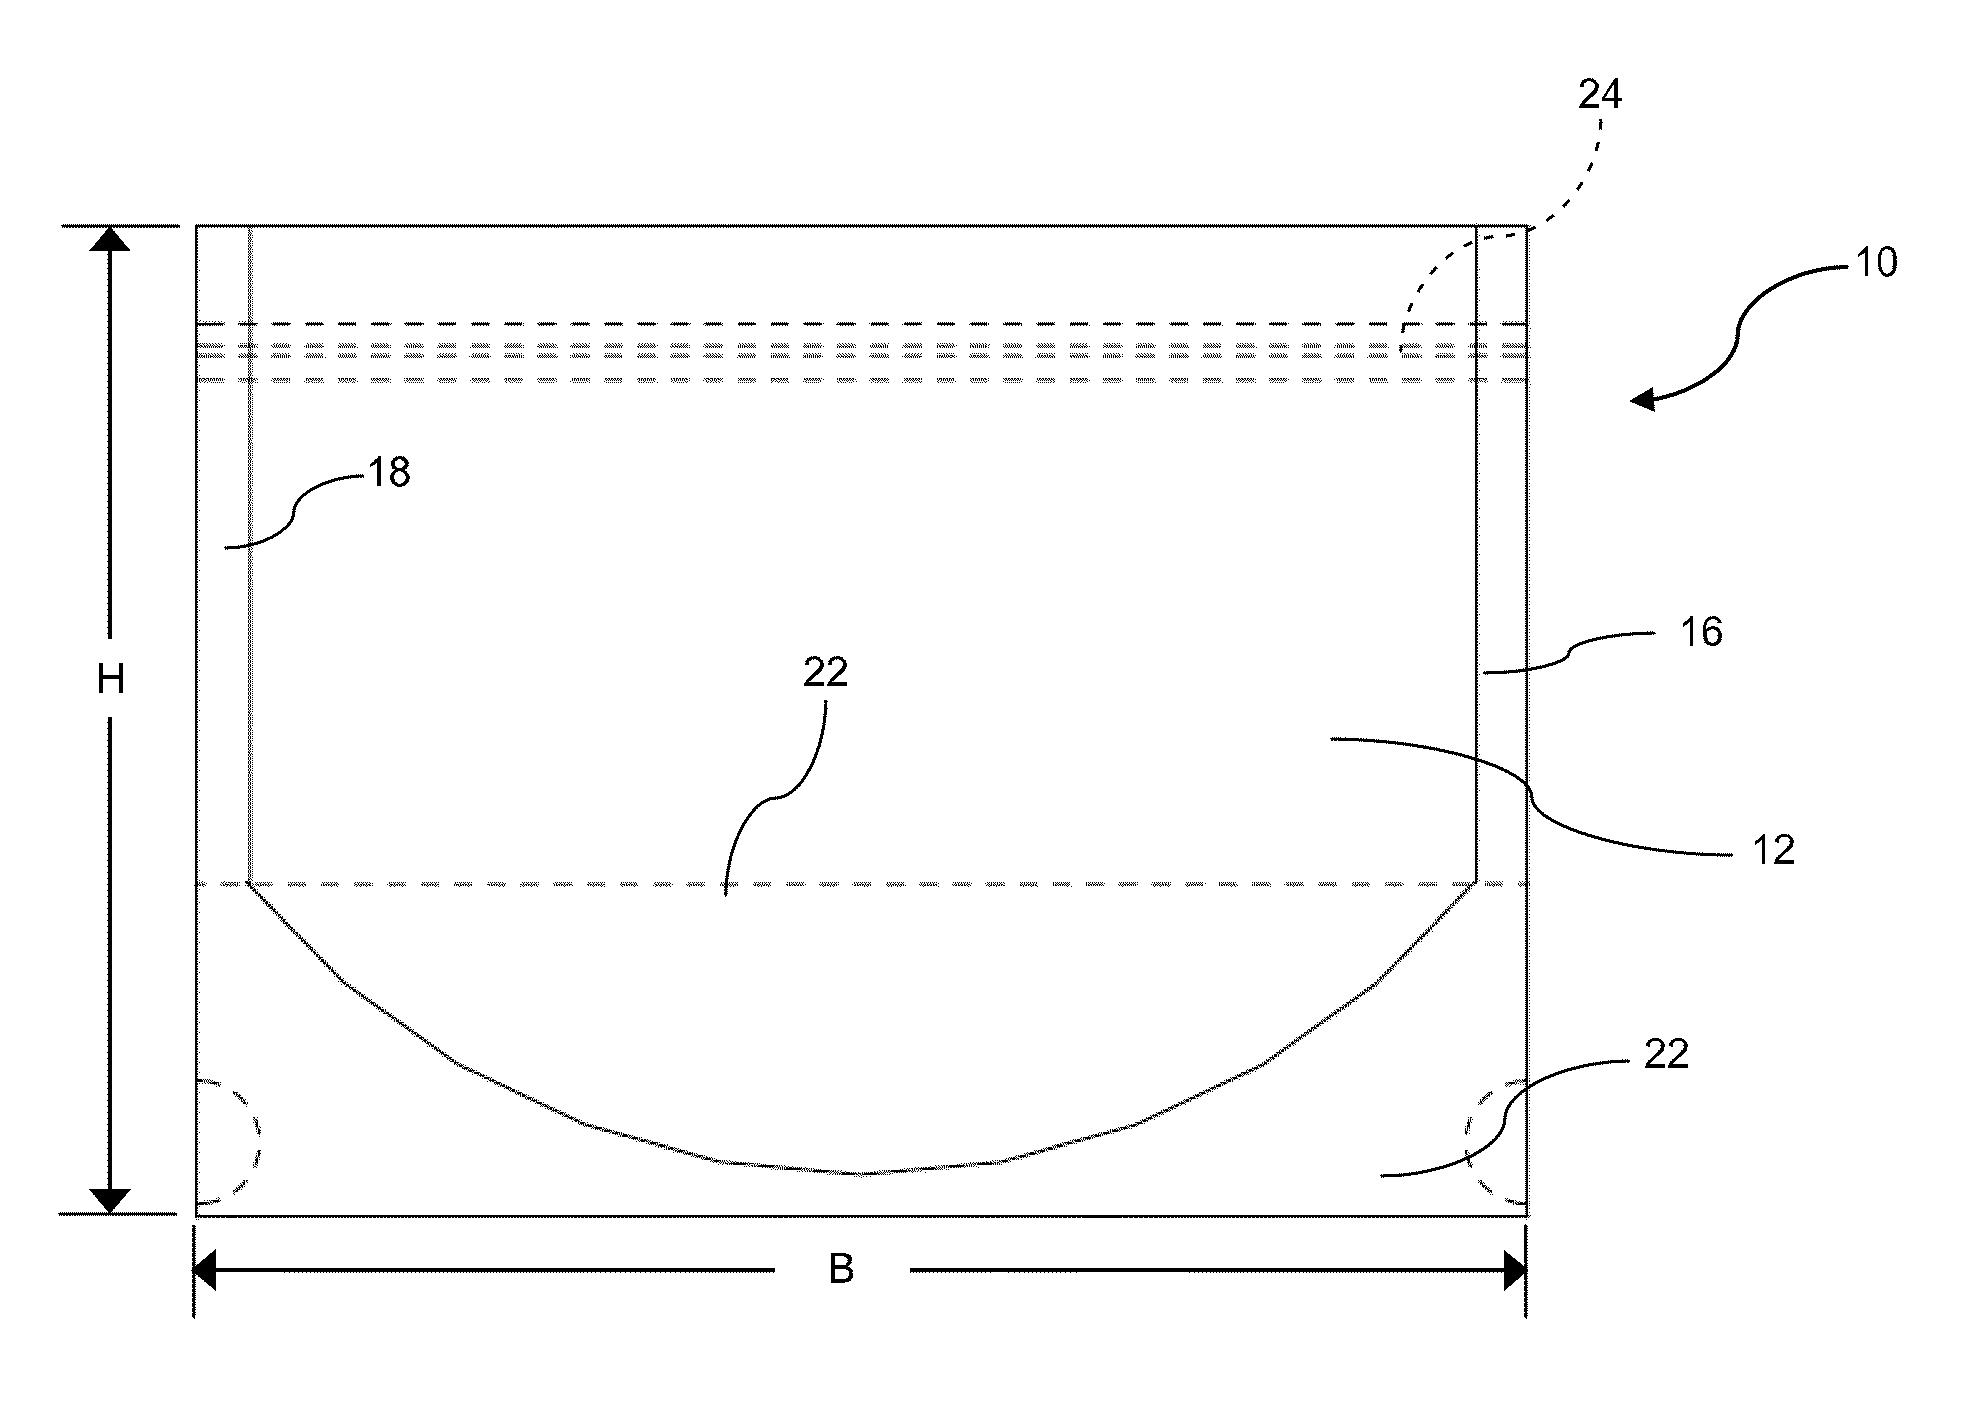 Flexible package and method of forming a cuff